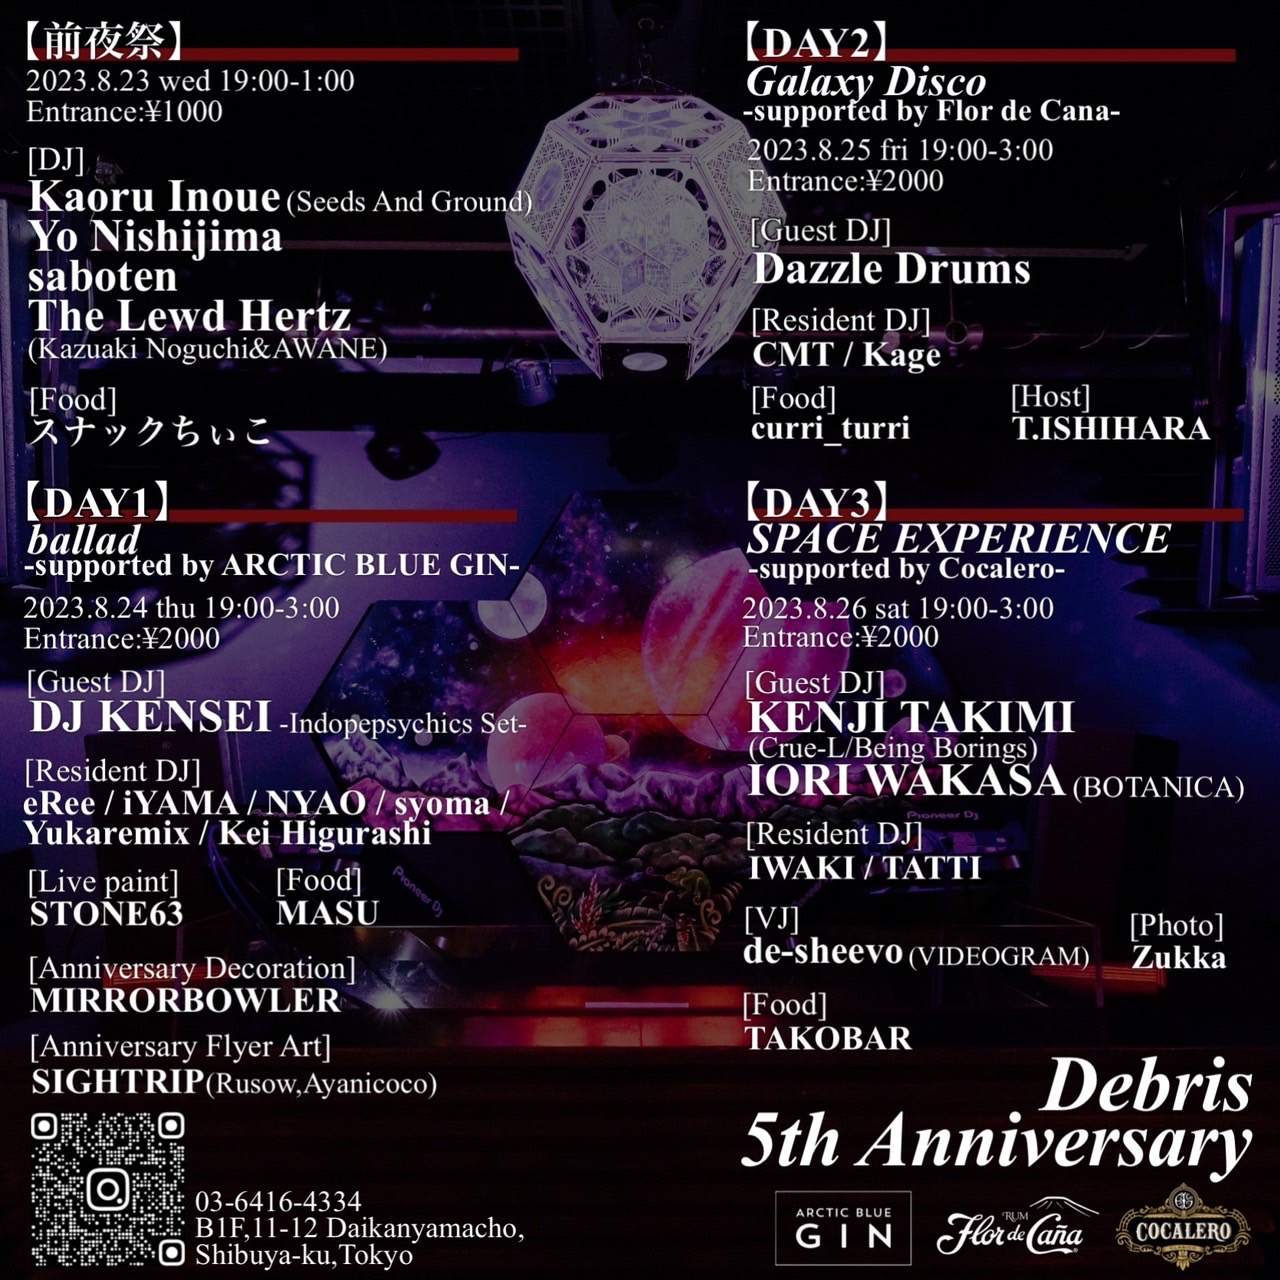 Debris 5th Anniversary - ballad - supported by ARCTIC BLUE GIN - フライヤー裏